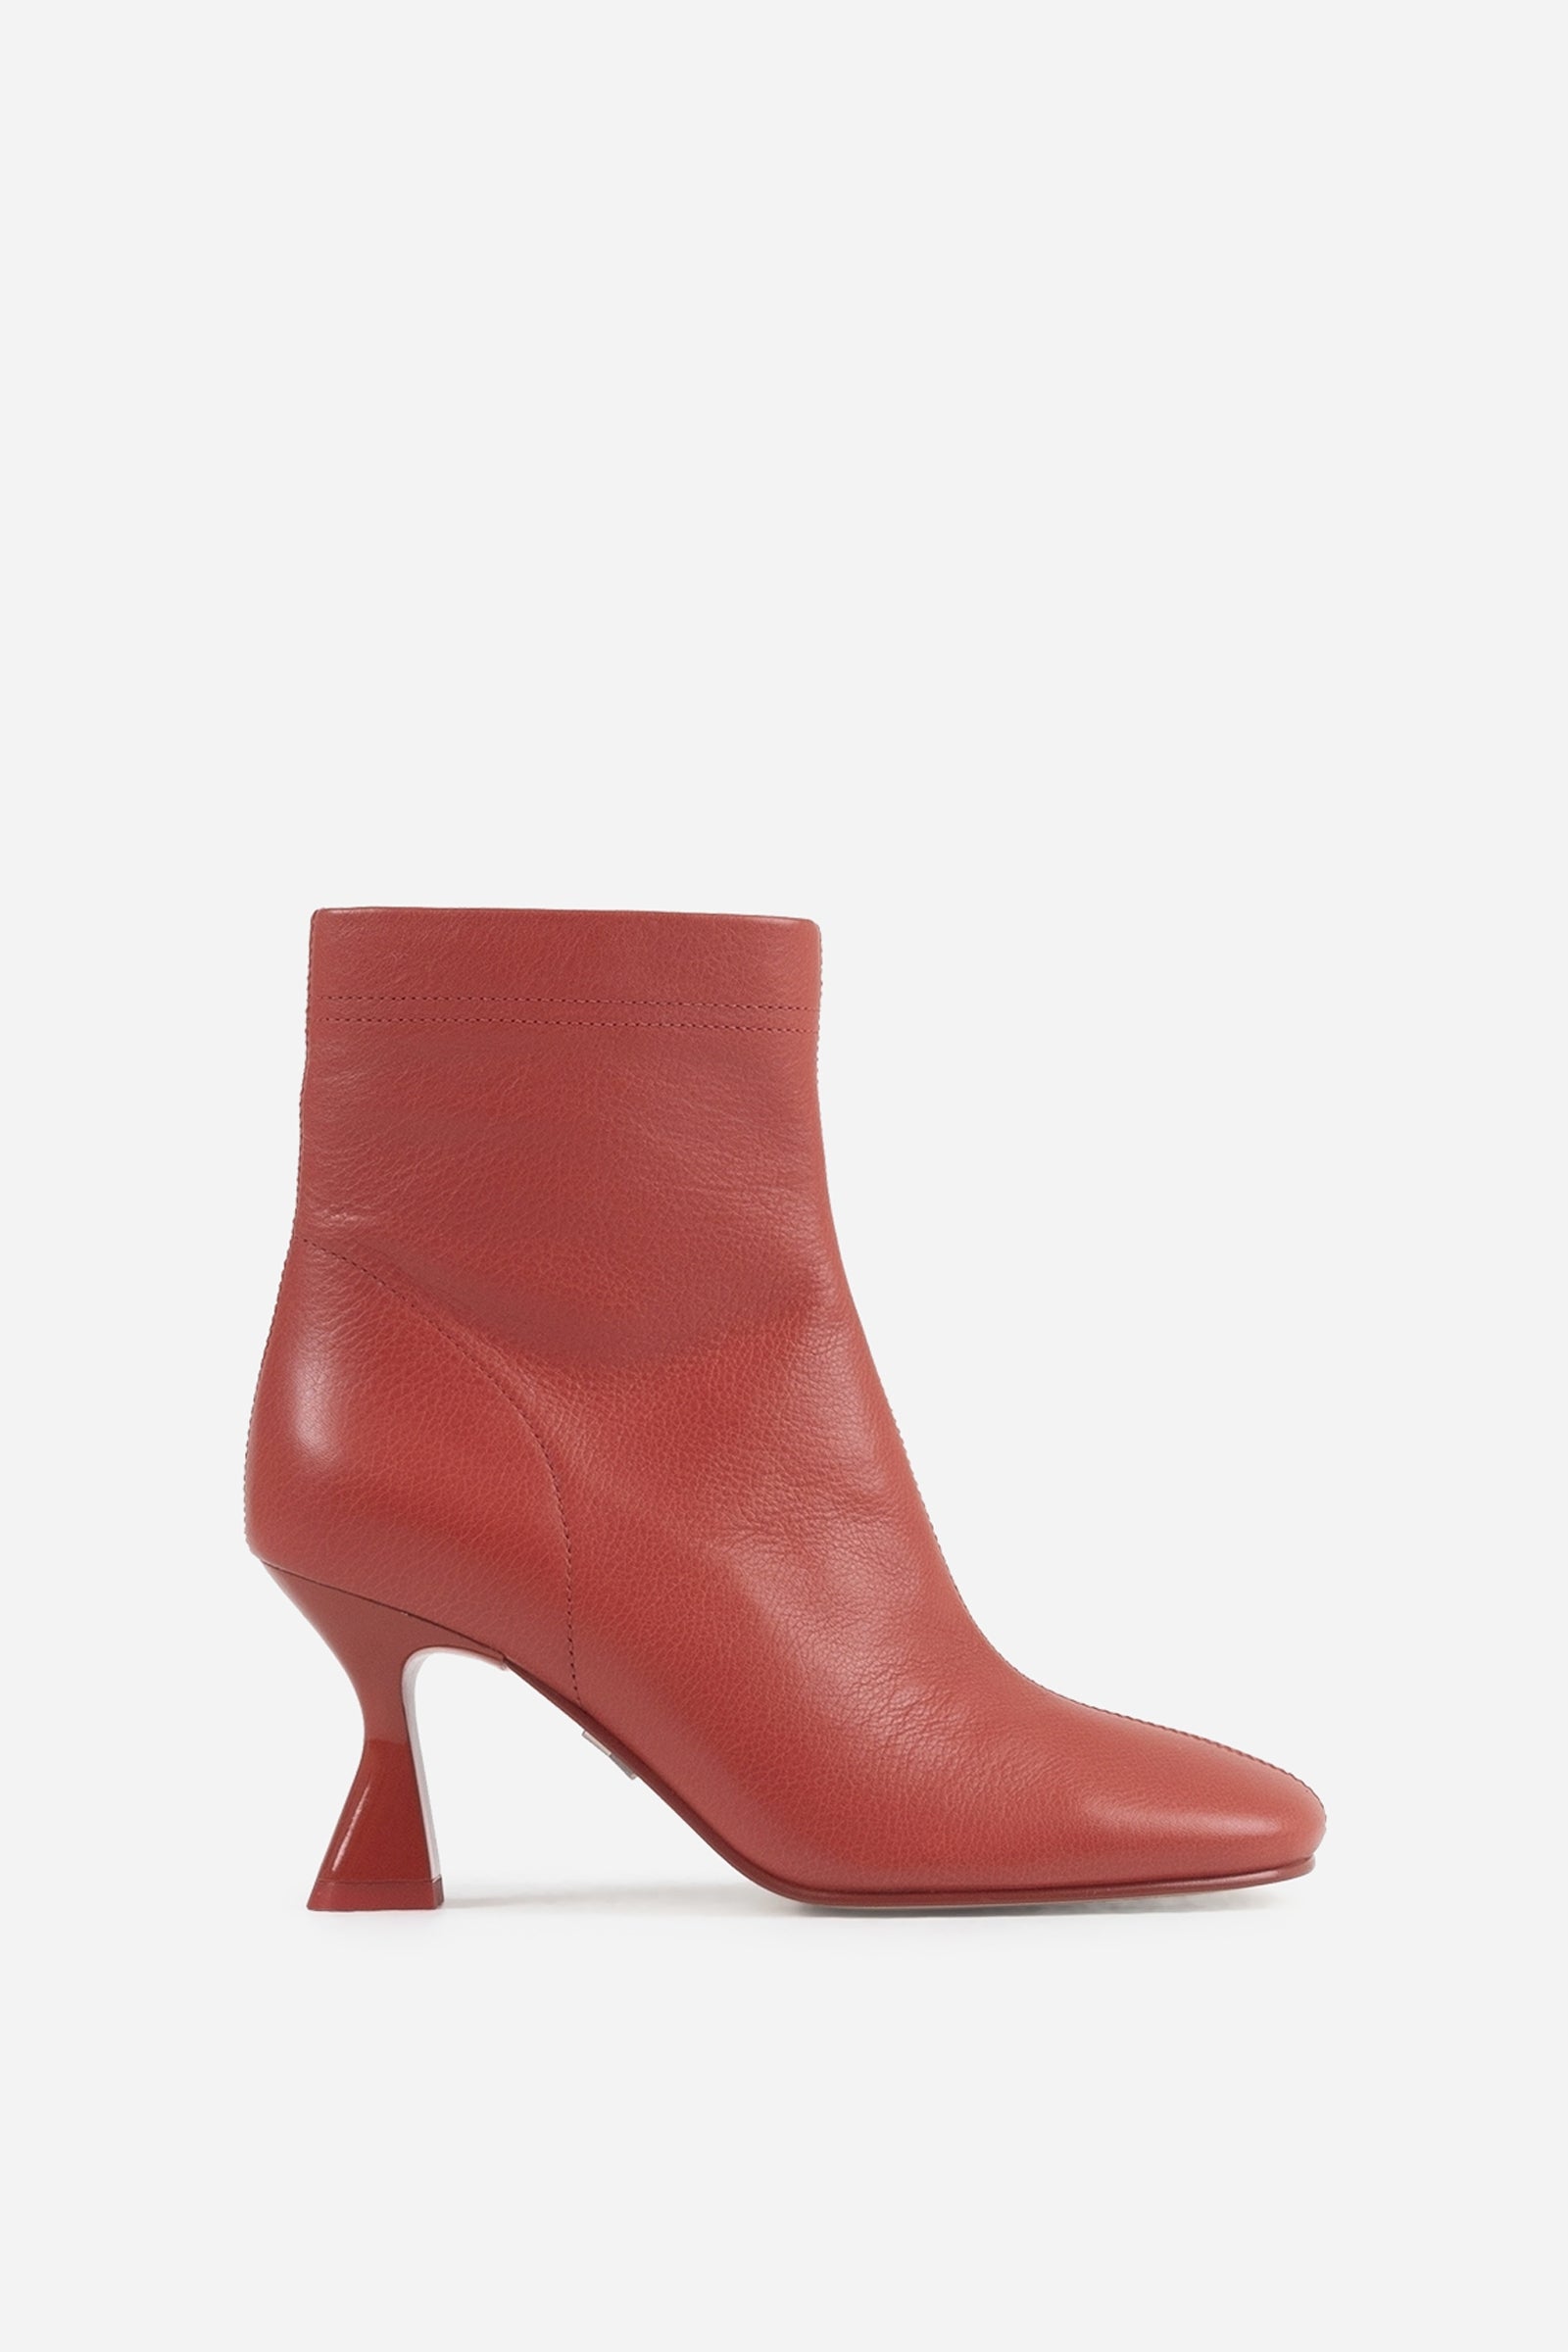 KG by Kurt Geiger Ride Stiletto Heeled Ankle Boots, Red Leather, 3